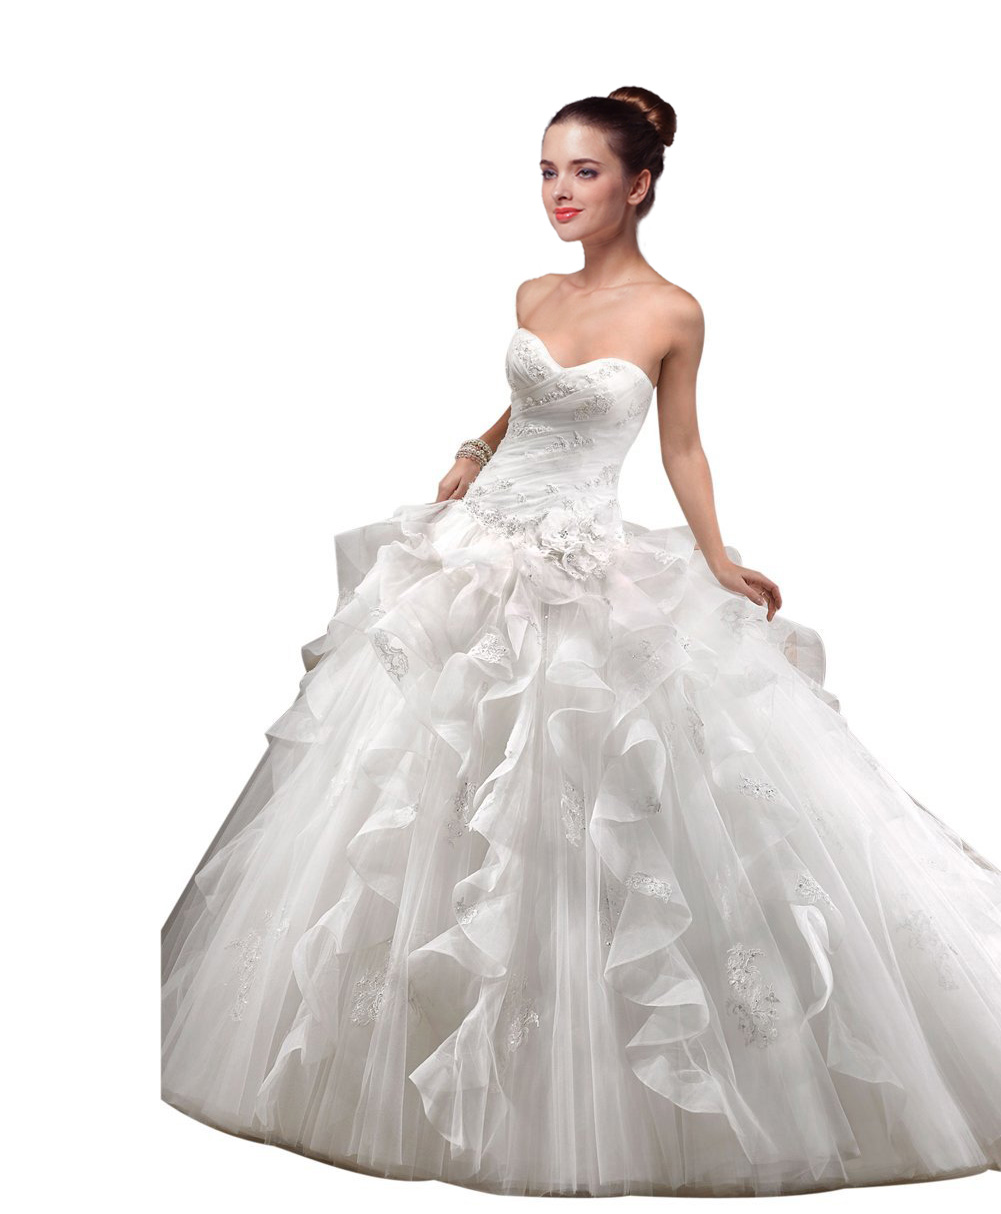 Women's Luxury Tull Over Satin Ball Gown With Tiered Organza Wed